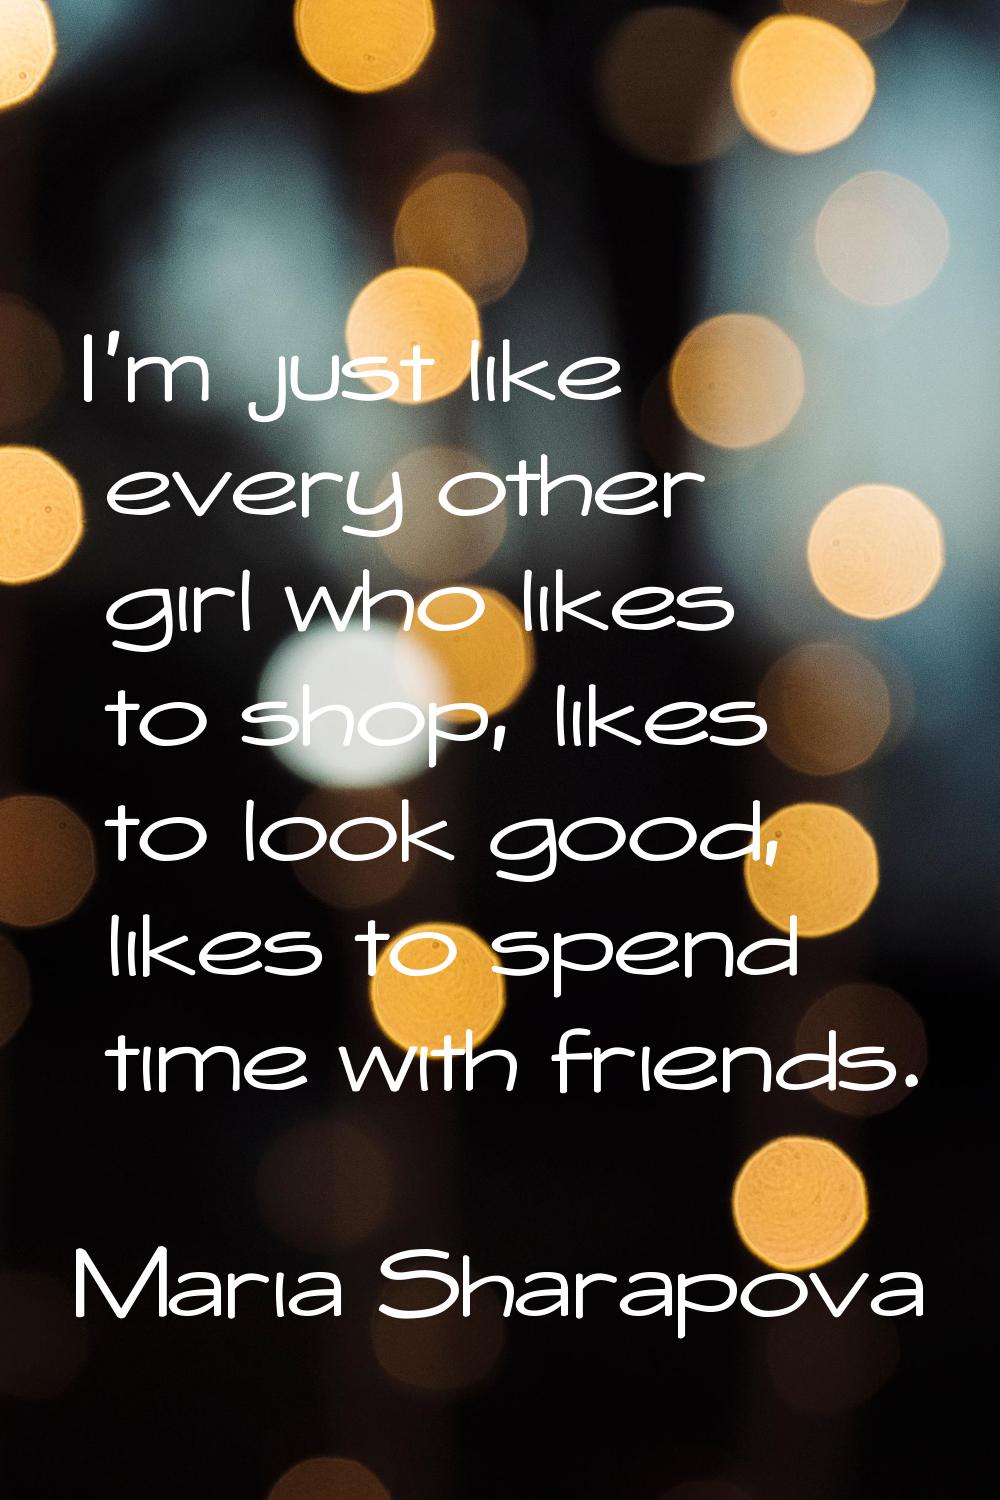 I'm just like every other girl who likes to shop, likes to look good, likes to spend time with frie